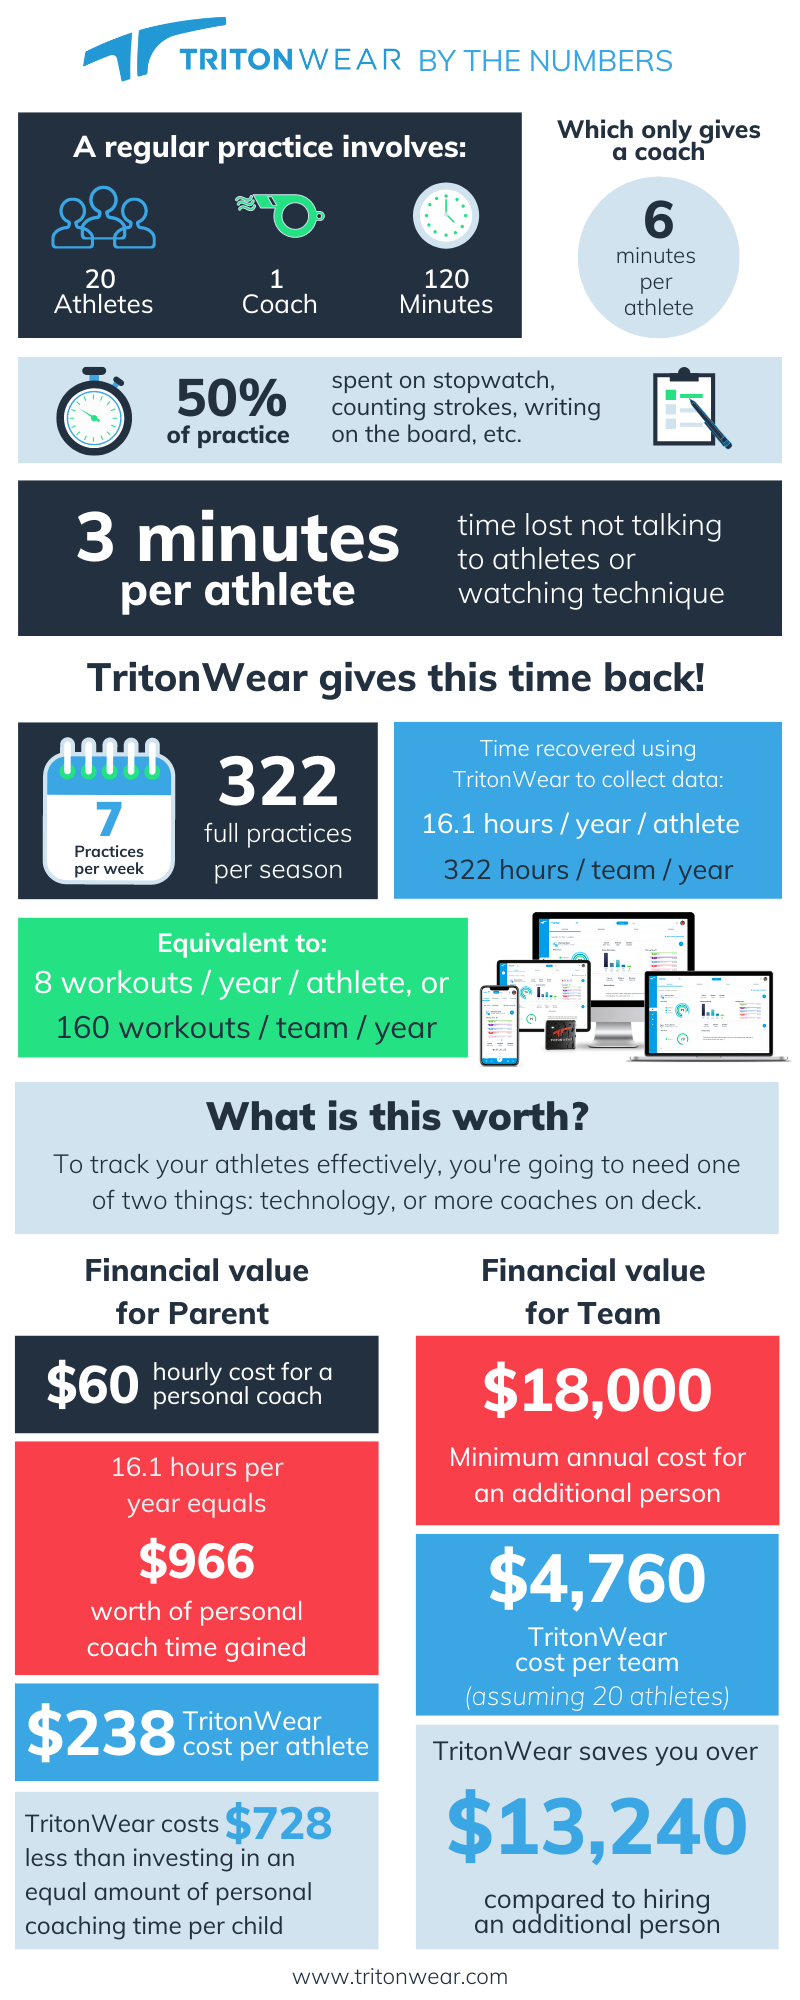 Copy of TritonWear By The Numbers Infographic (2021 update)